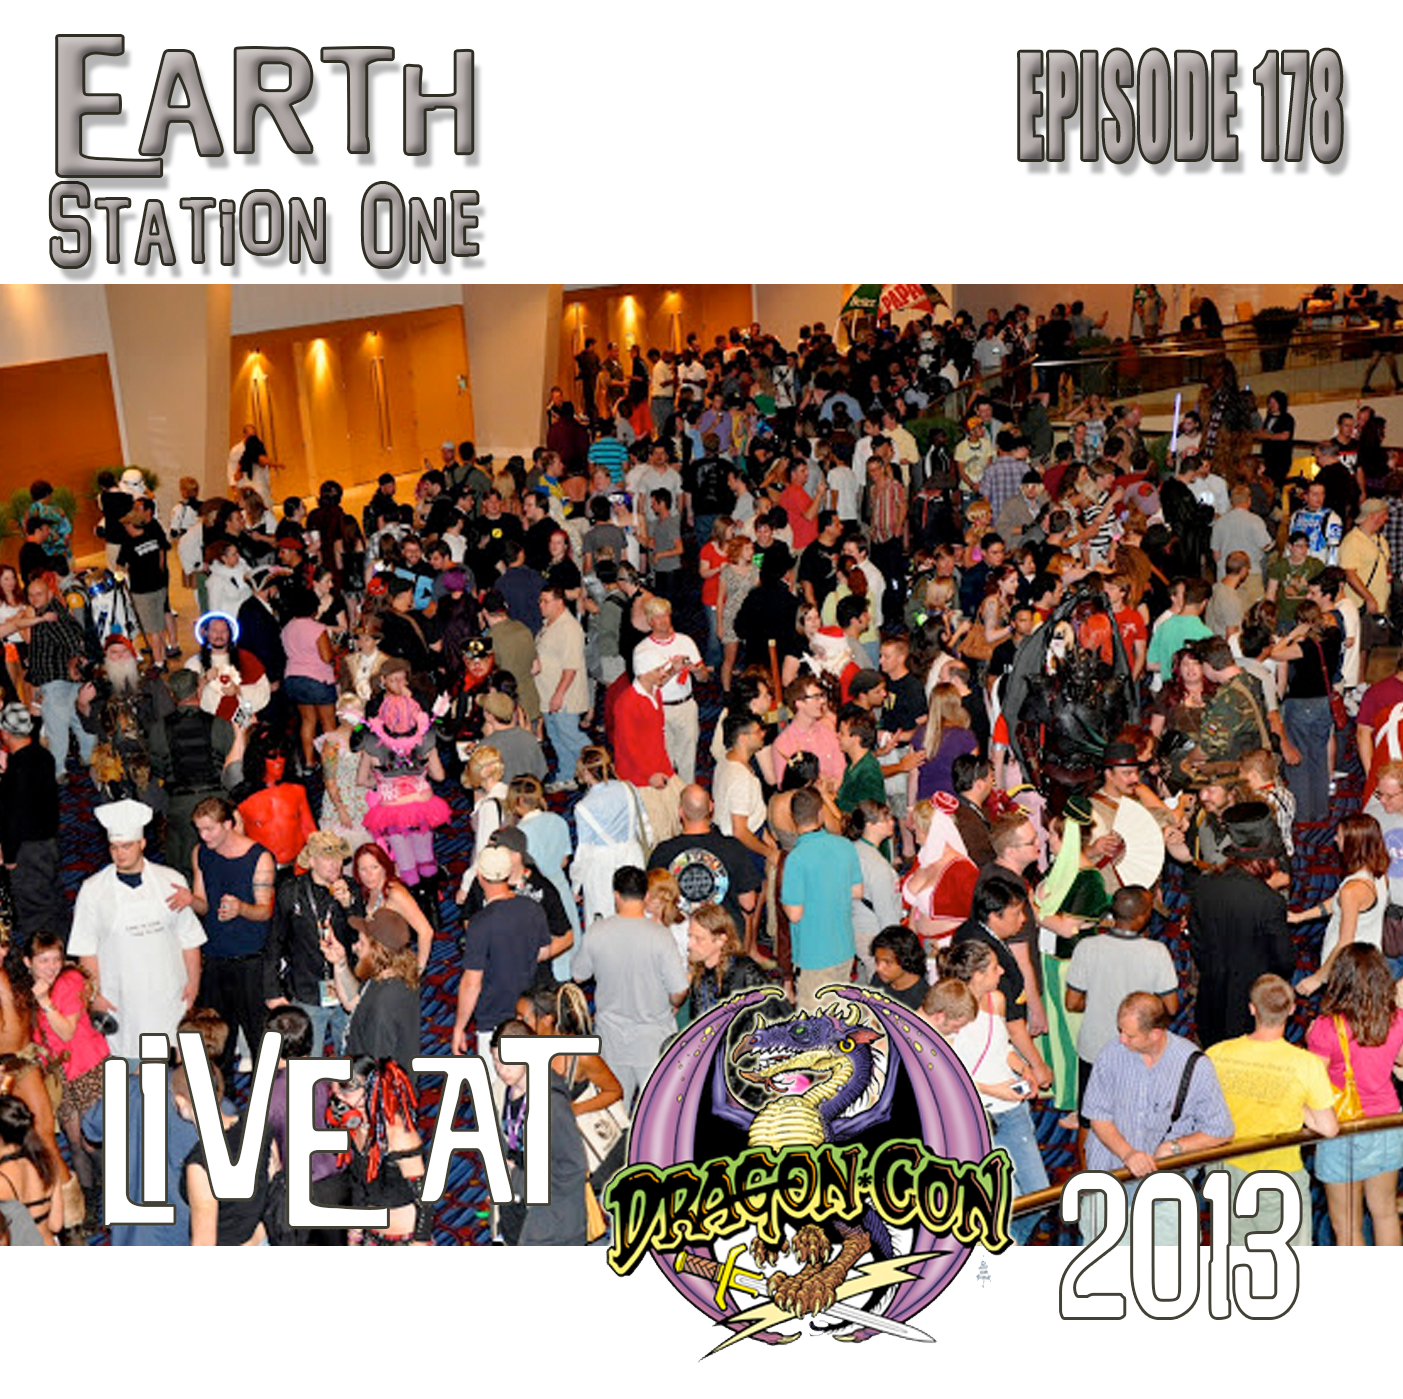 Earth Station One Episode 178